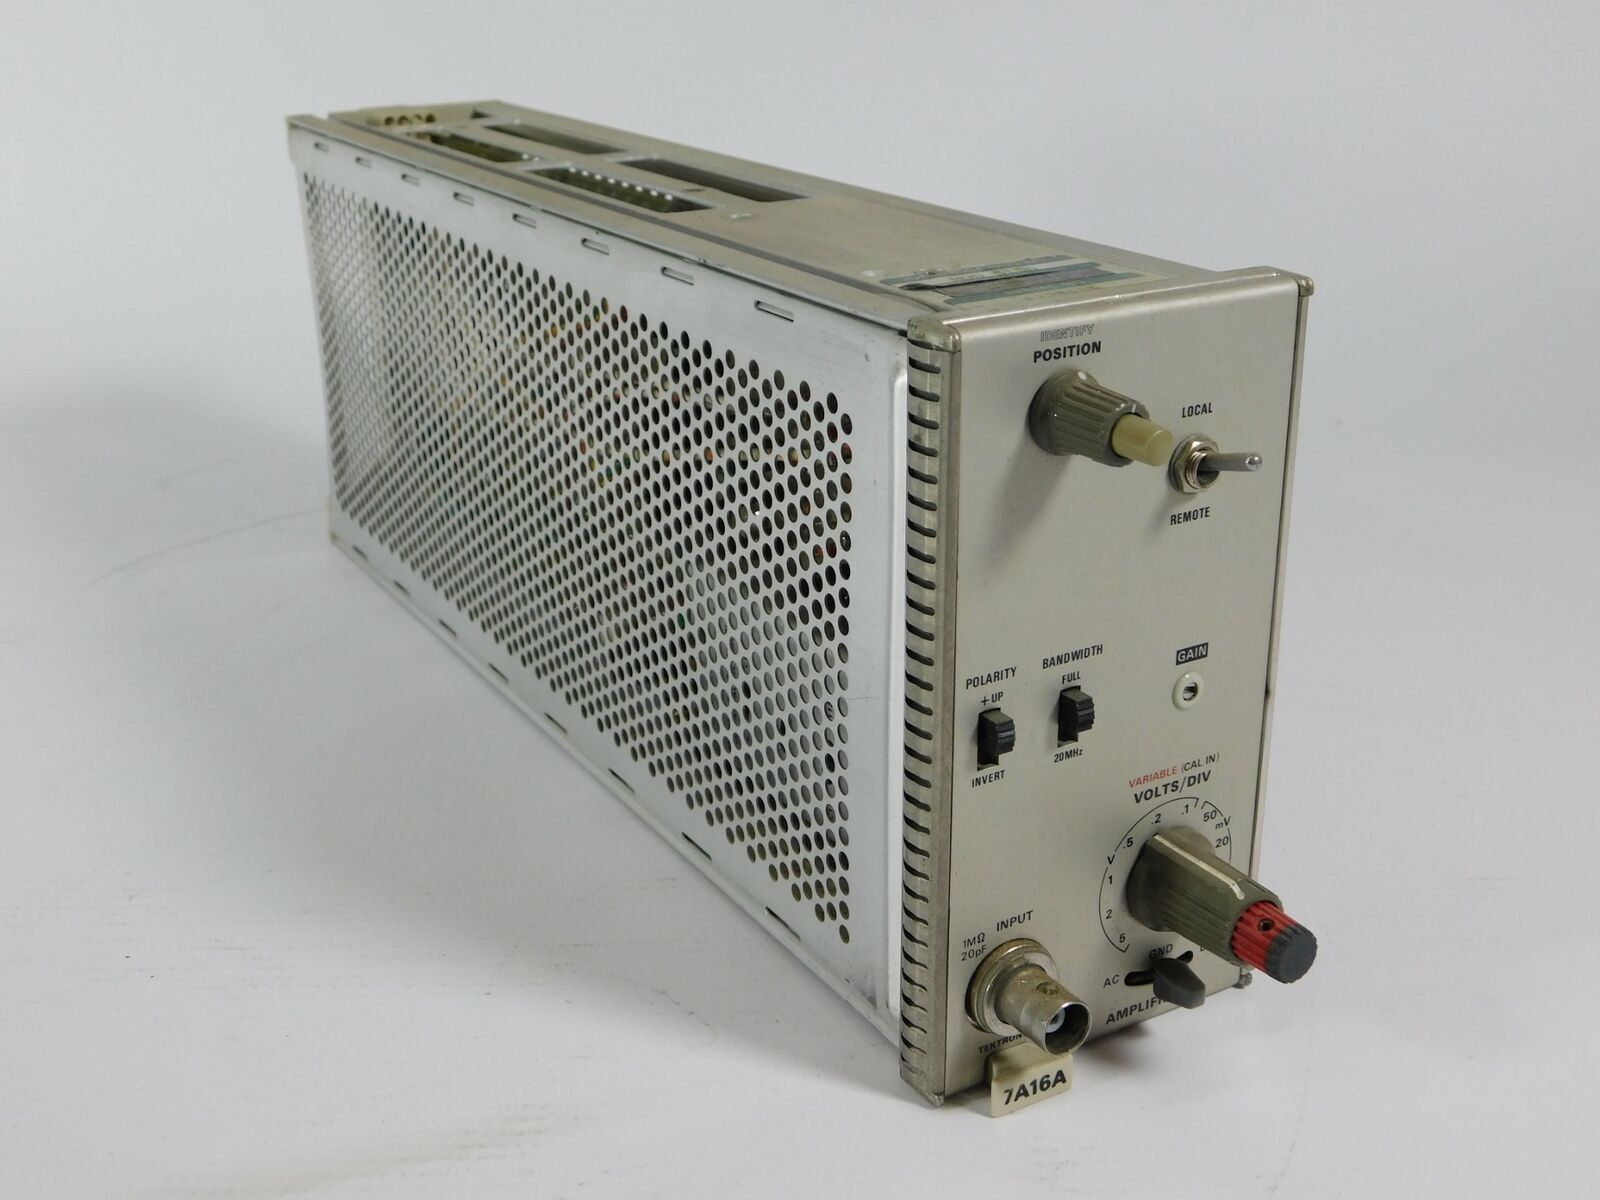 Tektronix 7A16A Plug-In Amplifier Module for 7000 Series Mainframes (untested)